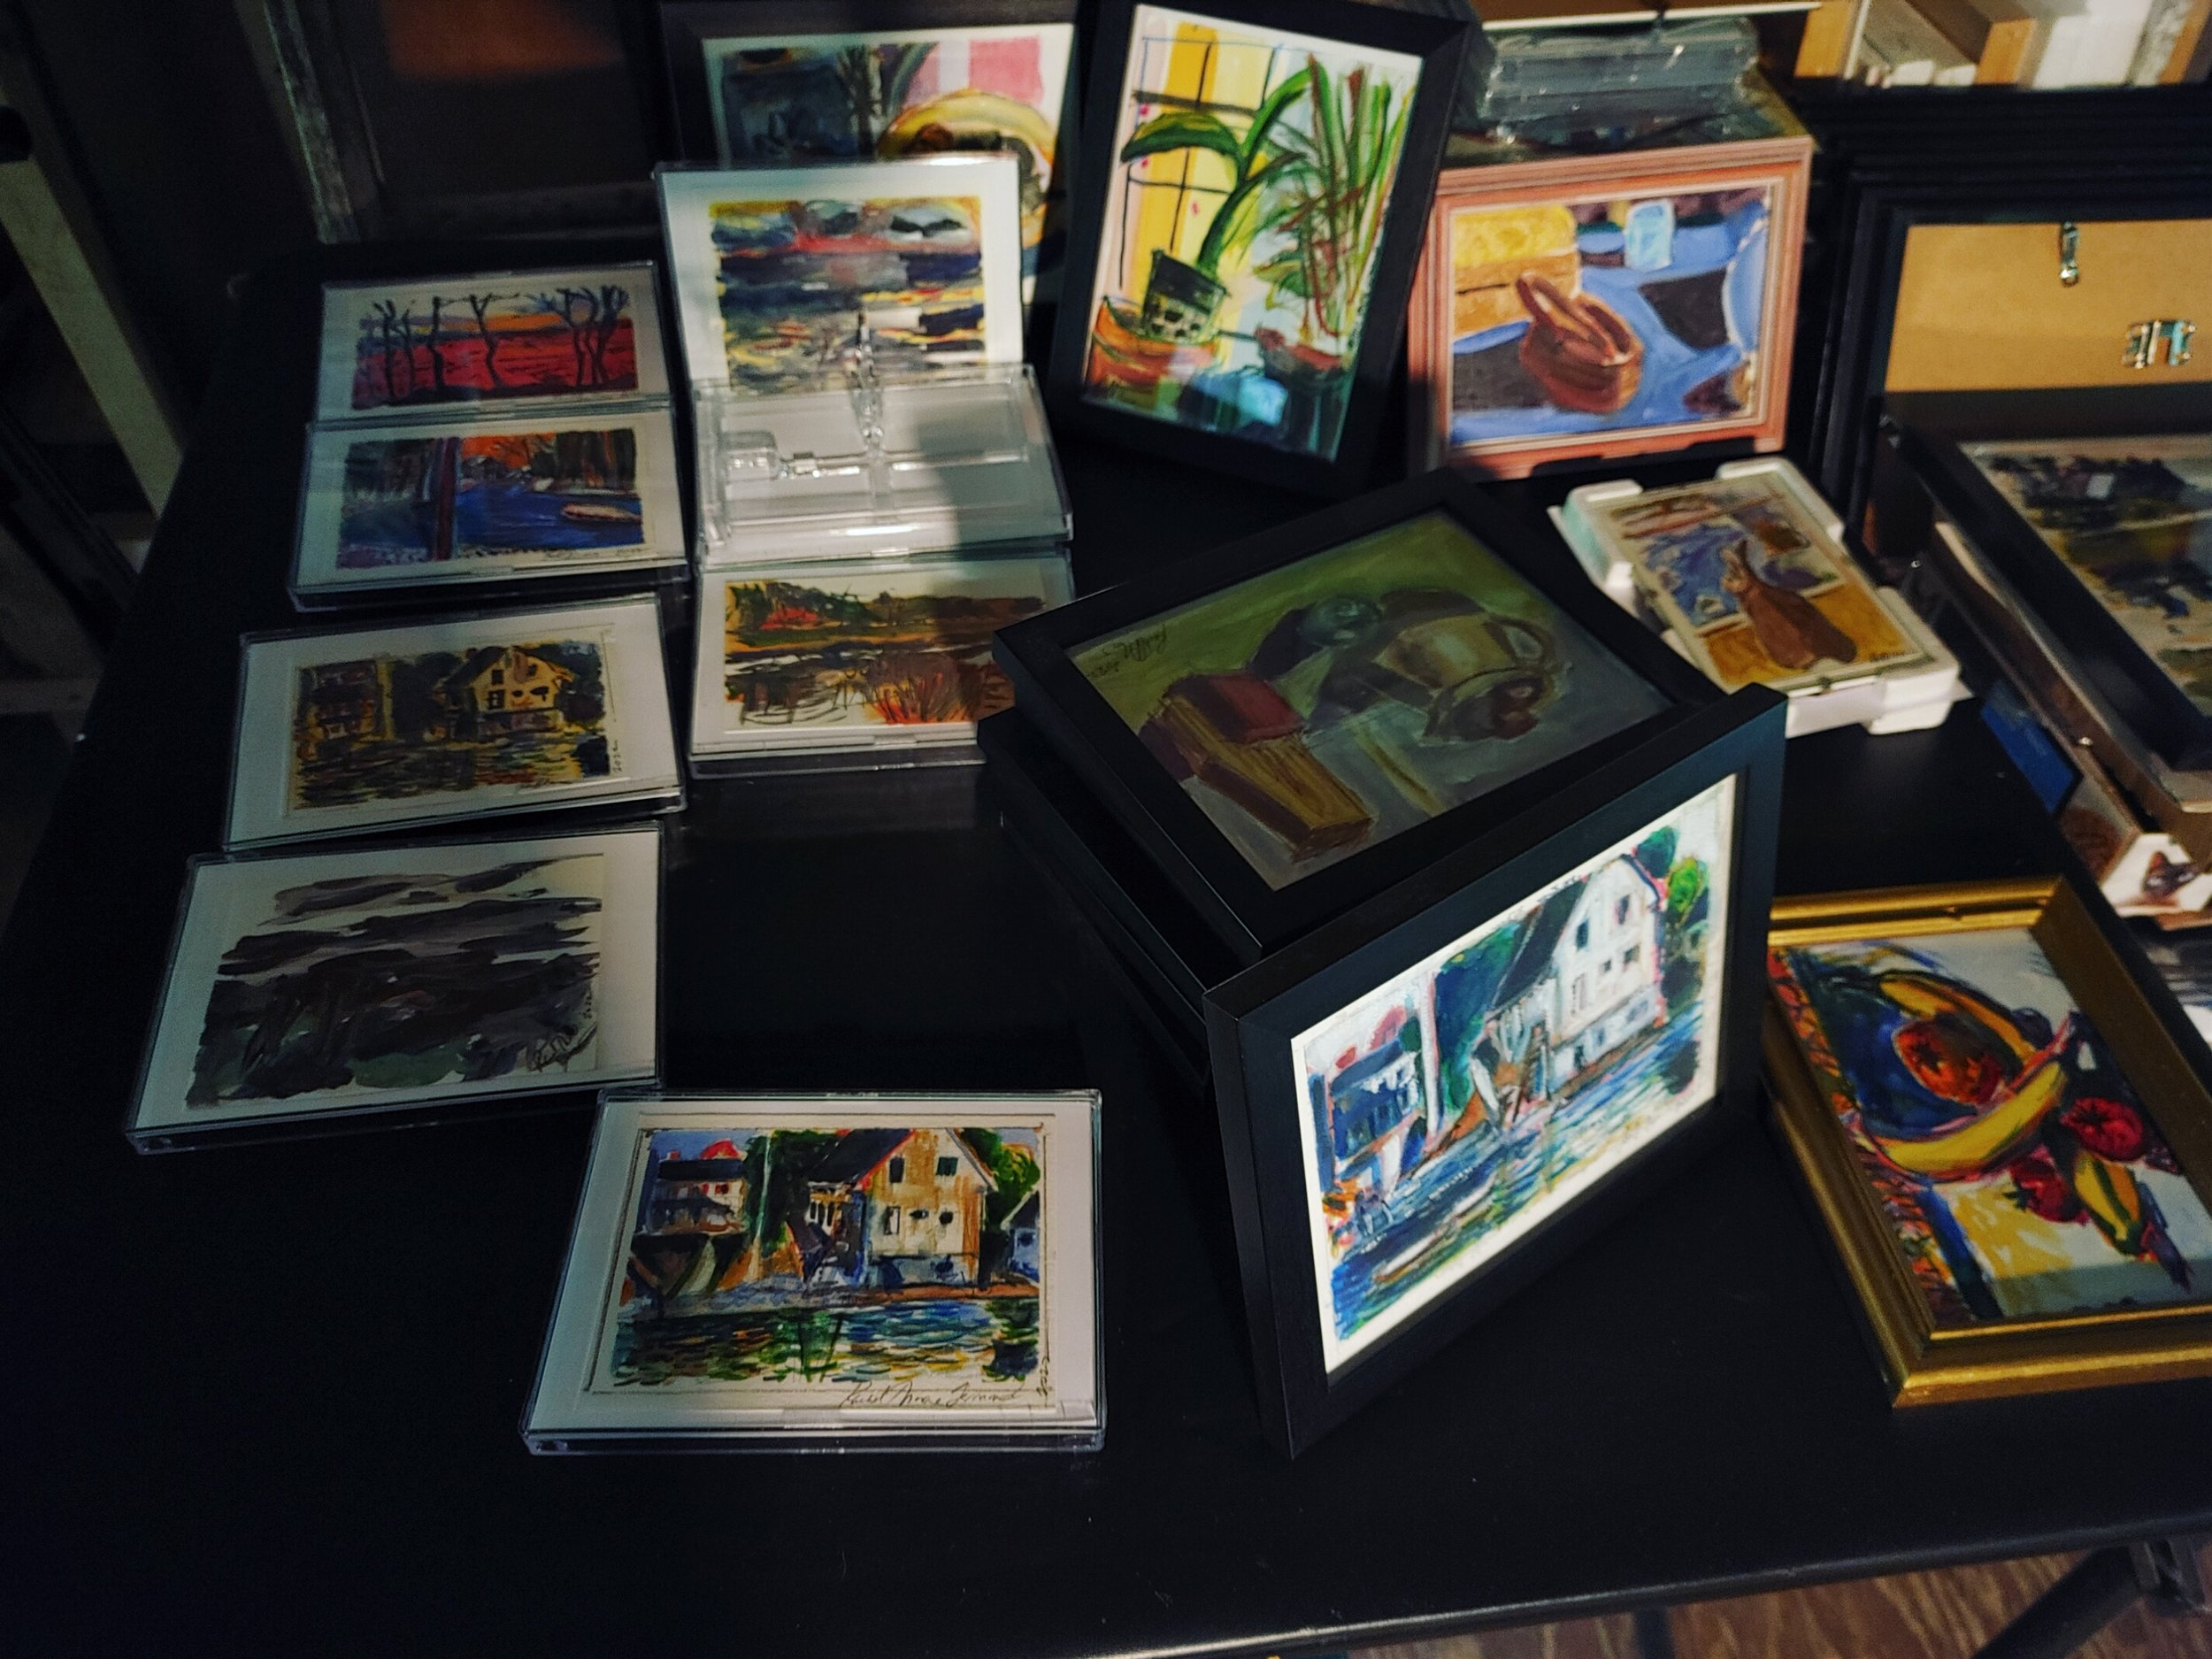 Art for Sale on the table small.jpeg